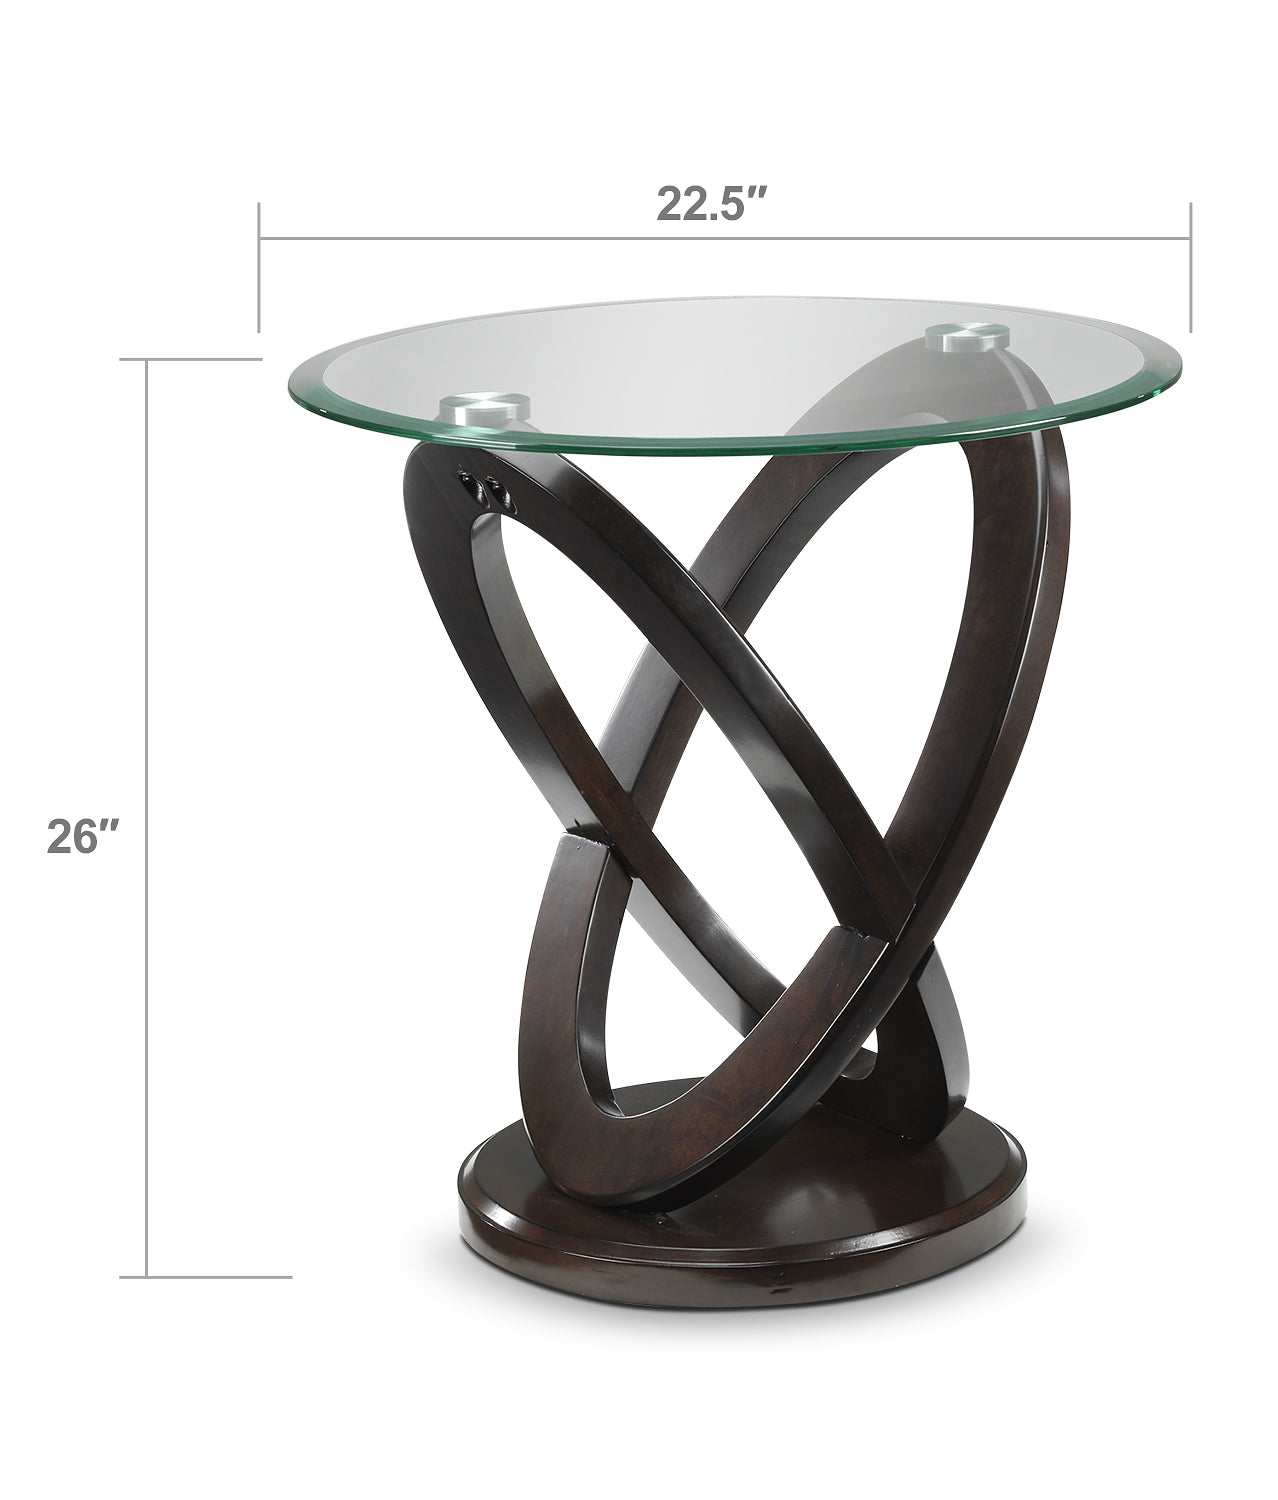 Atomic End Table - Brown Cherry